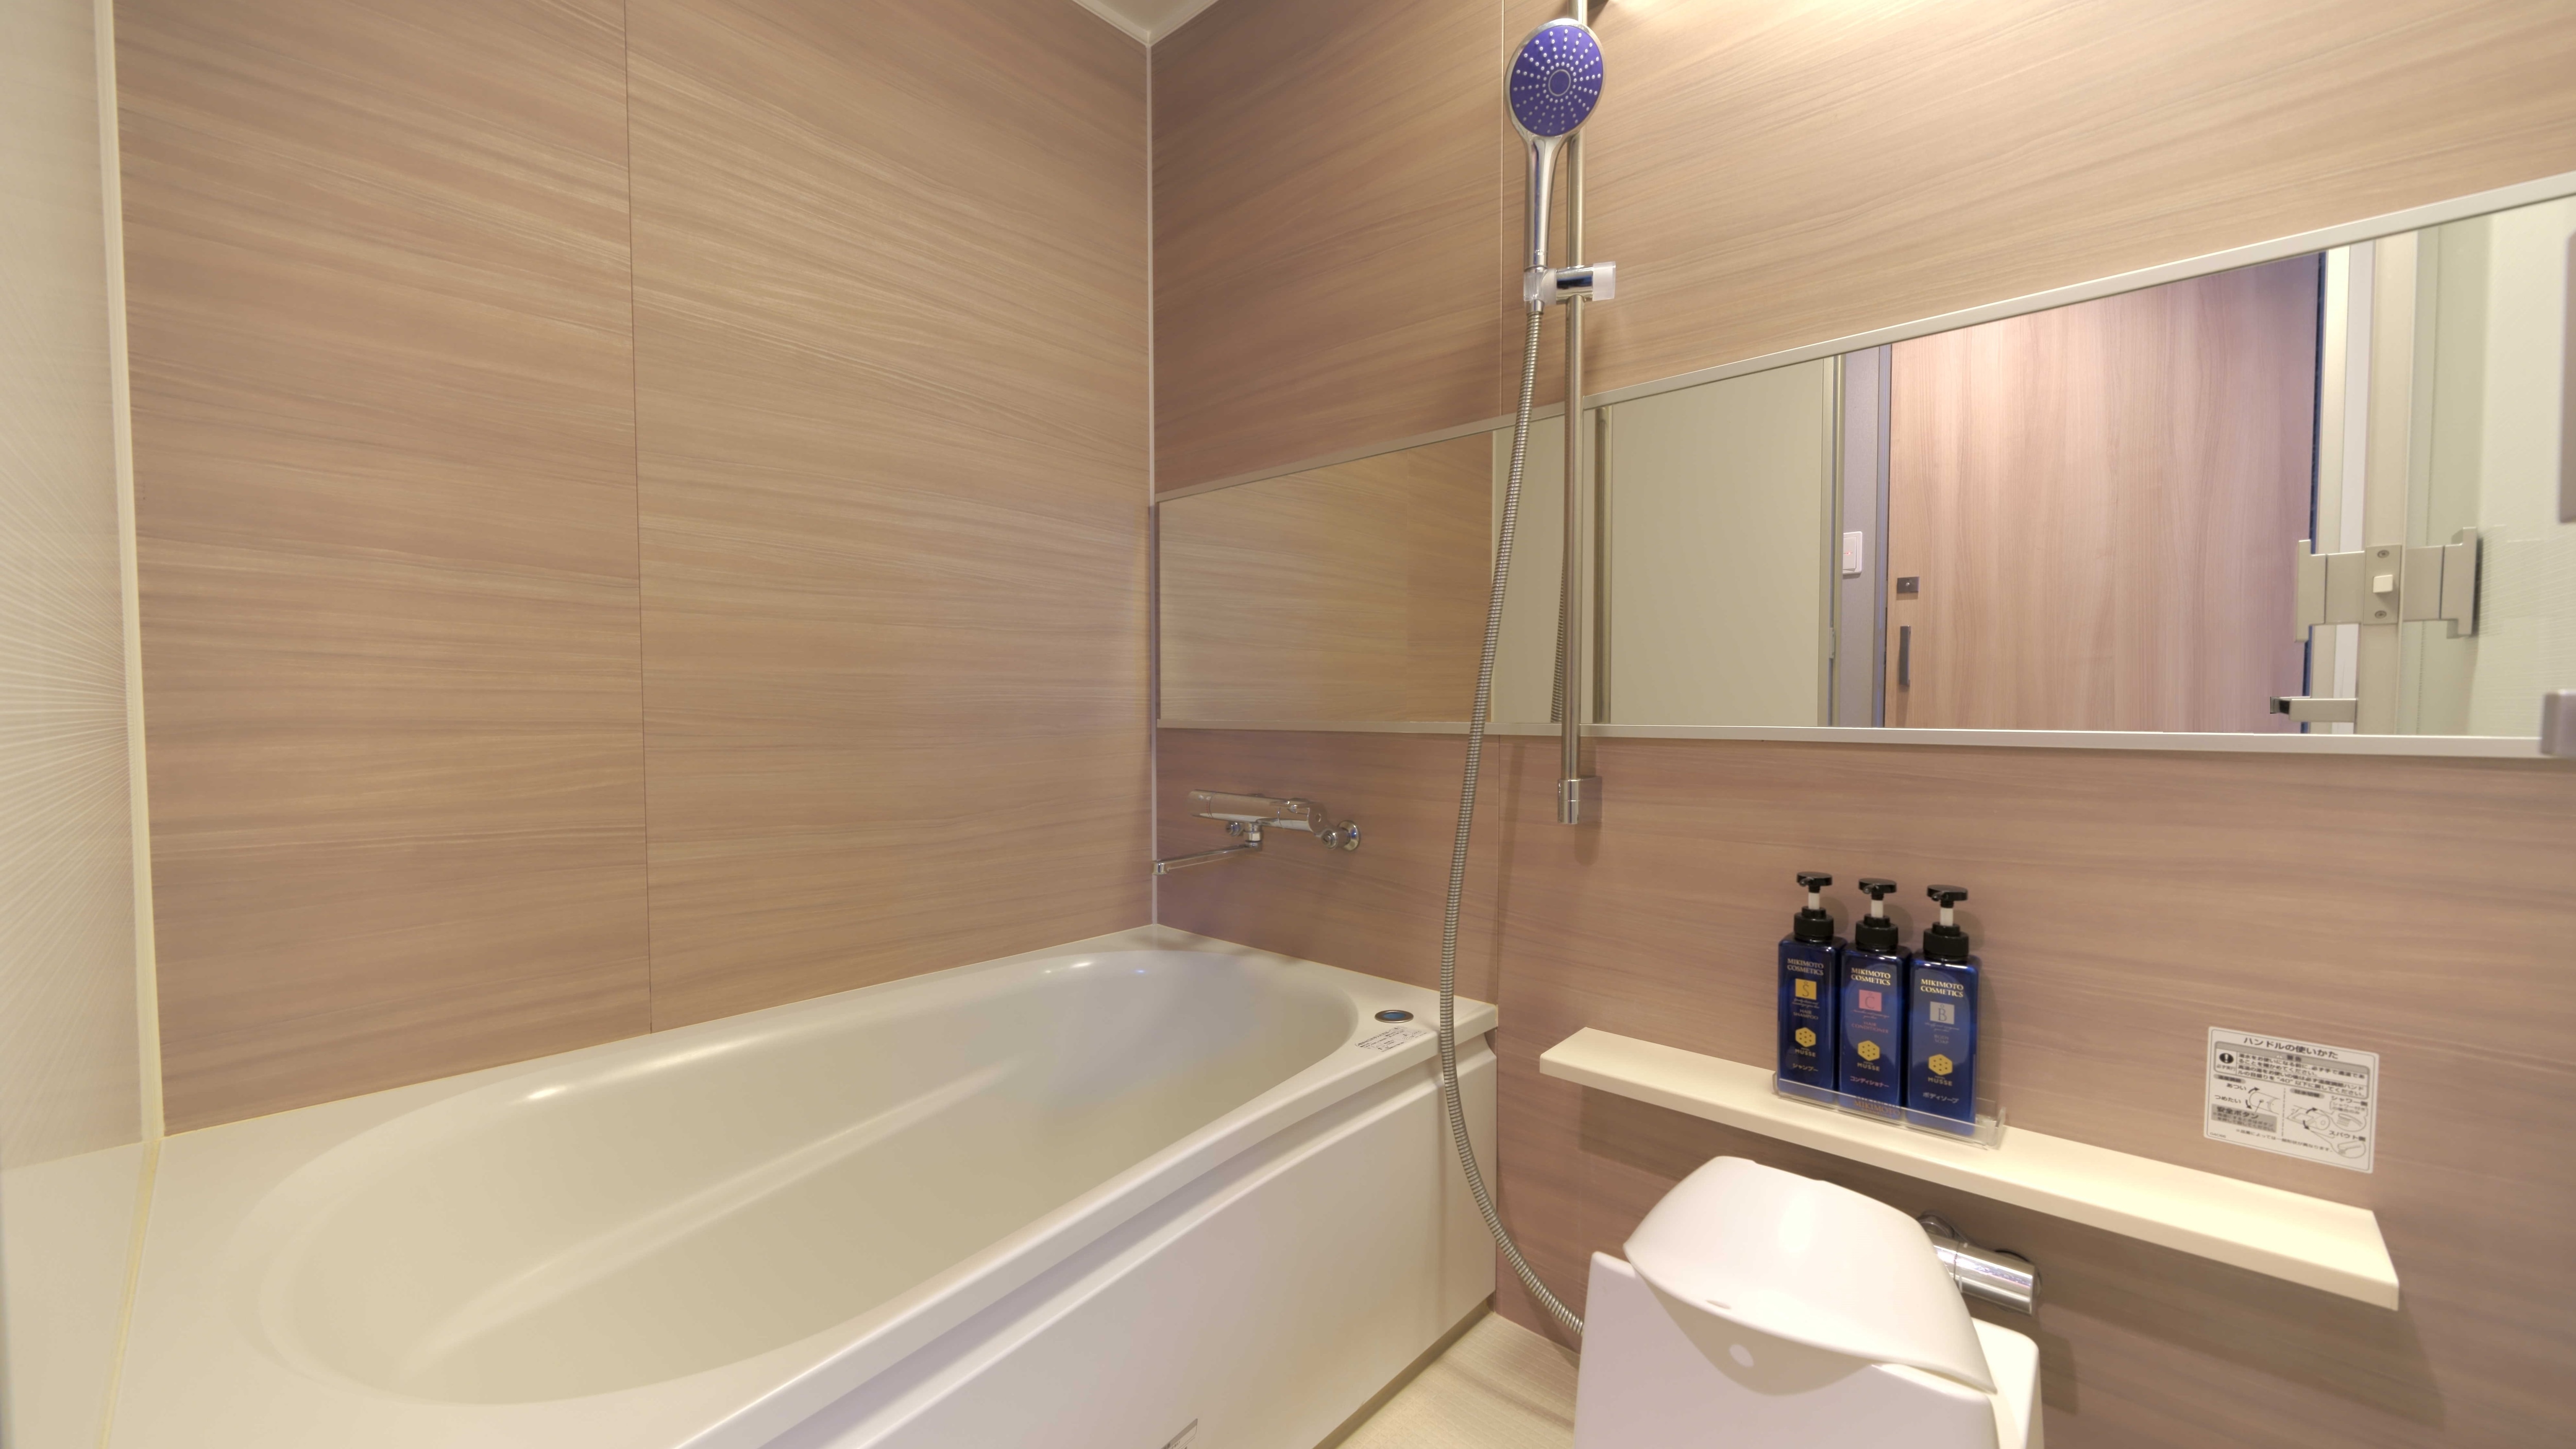 A bathroom in a regular guest room (1216 size). Equipped with bathtub, shower and washing area.